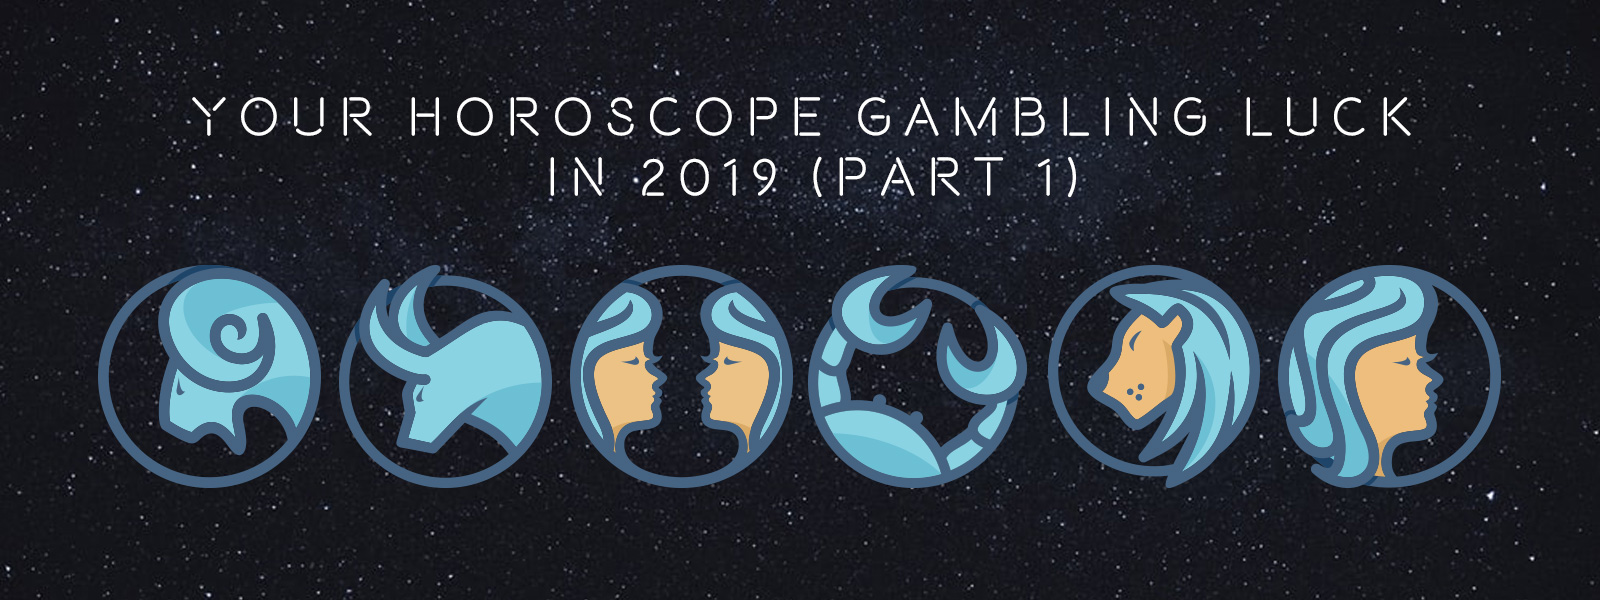 Blog Featured Image (Your Horoscope Gambling Luck in 2019 (Part 2) Blog Featured Image